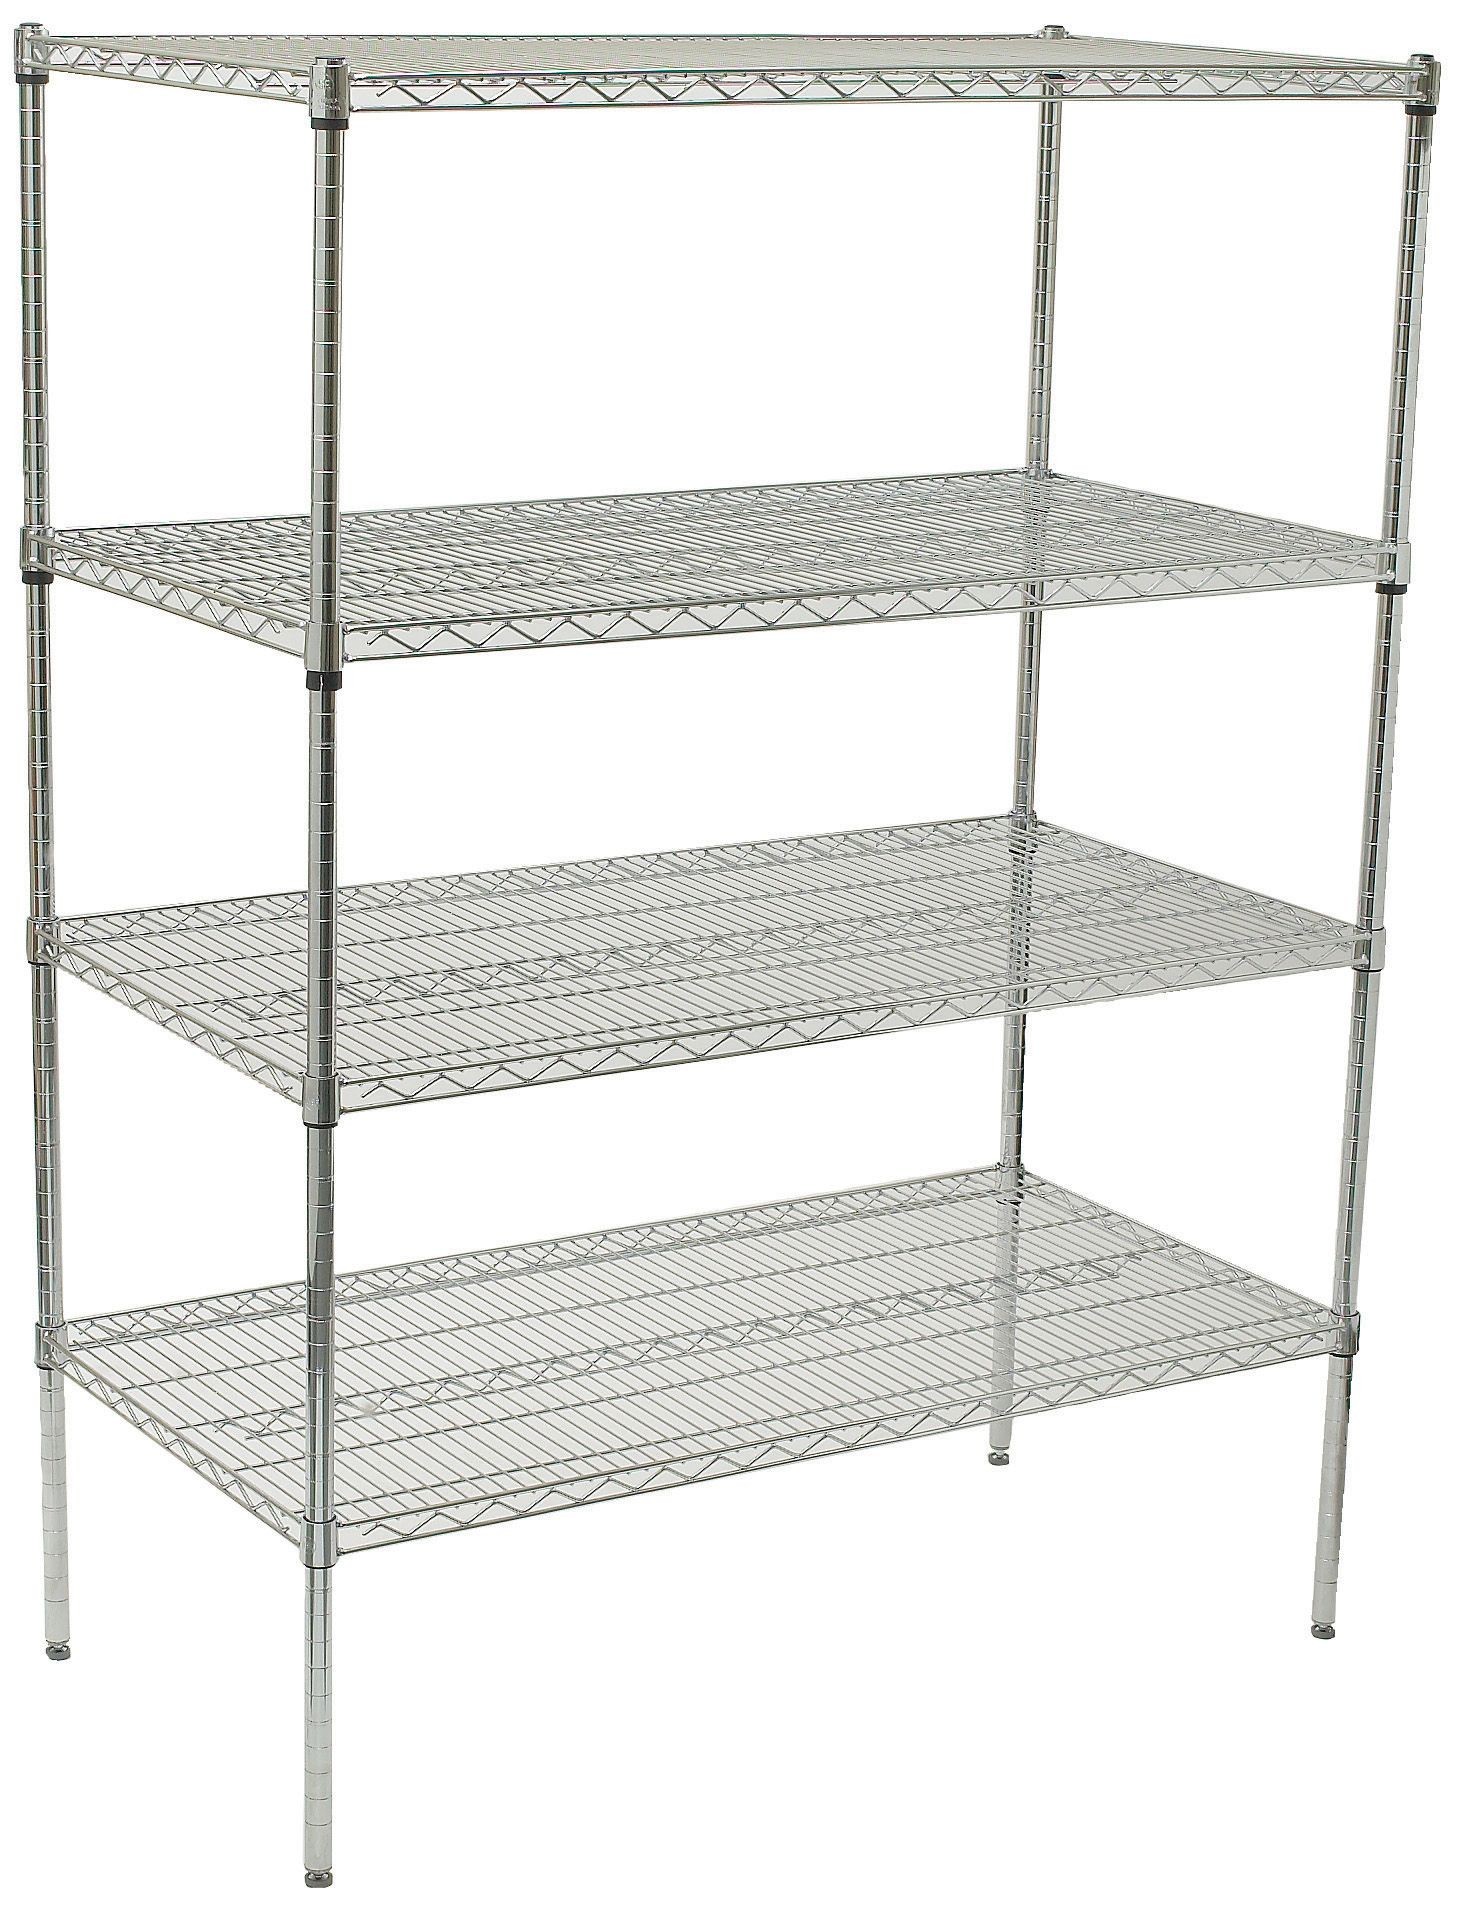 Winco VCS-1848 Chrome Plated 4-Tier Wire Shelving Set, 18" x 48" x 72"